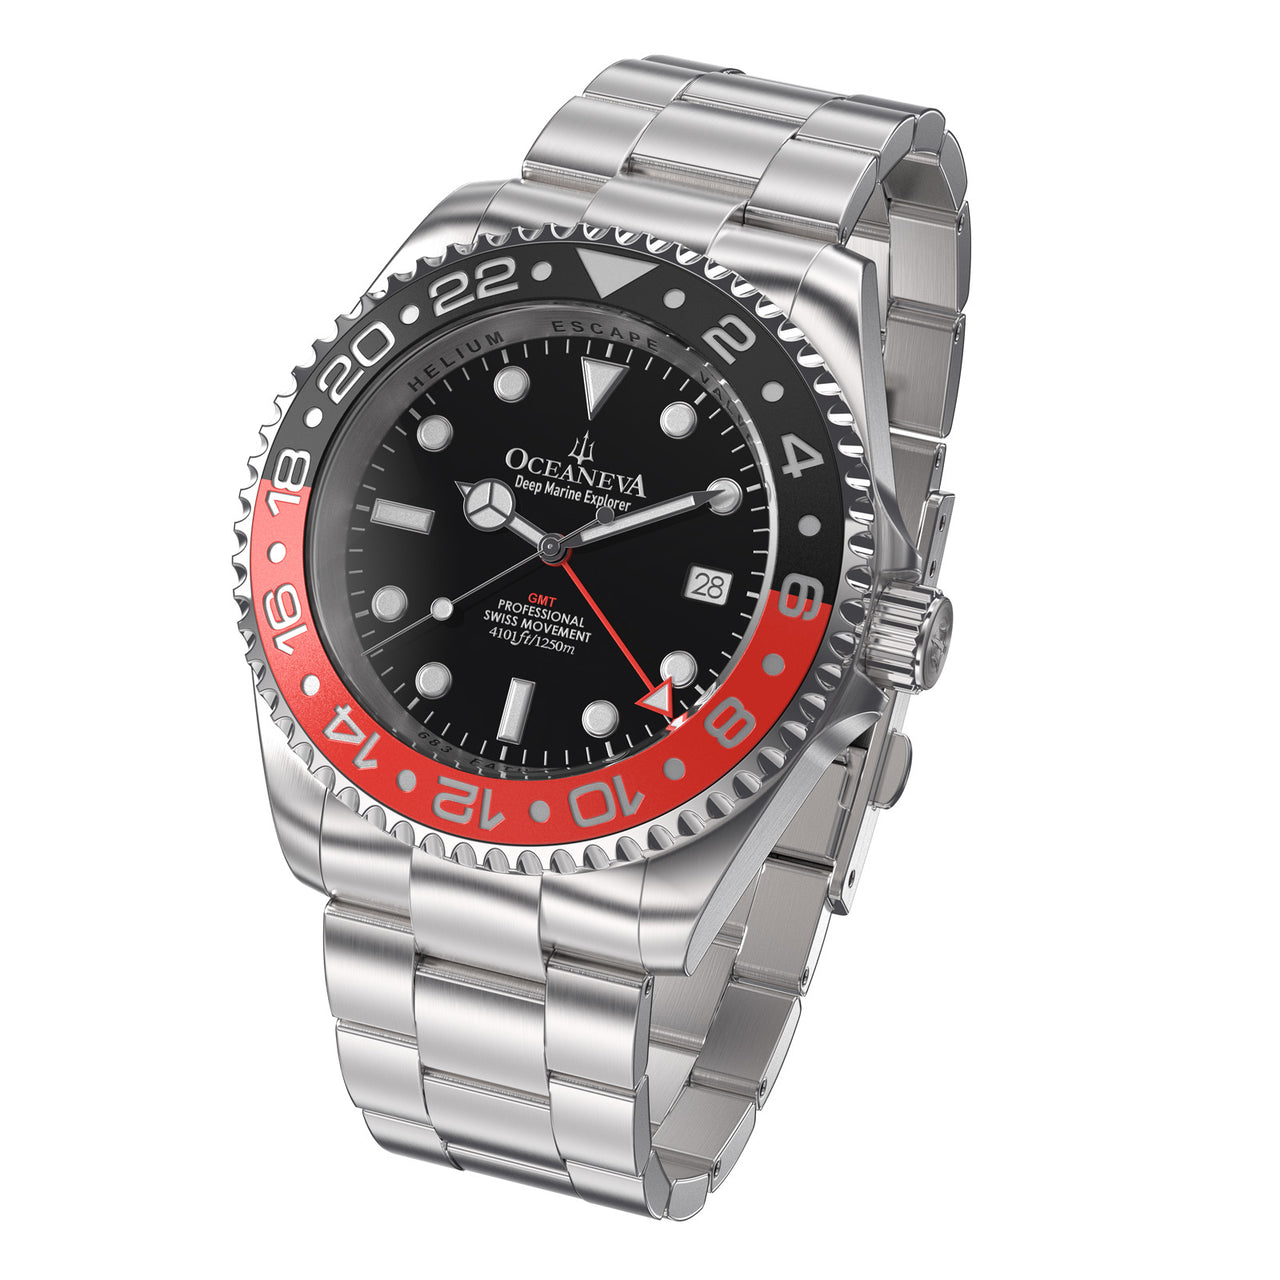 Oceaneva 1250M GMT Dive Watch Red And Black Front Picture Slight Left Slant View